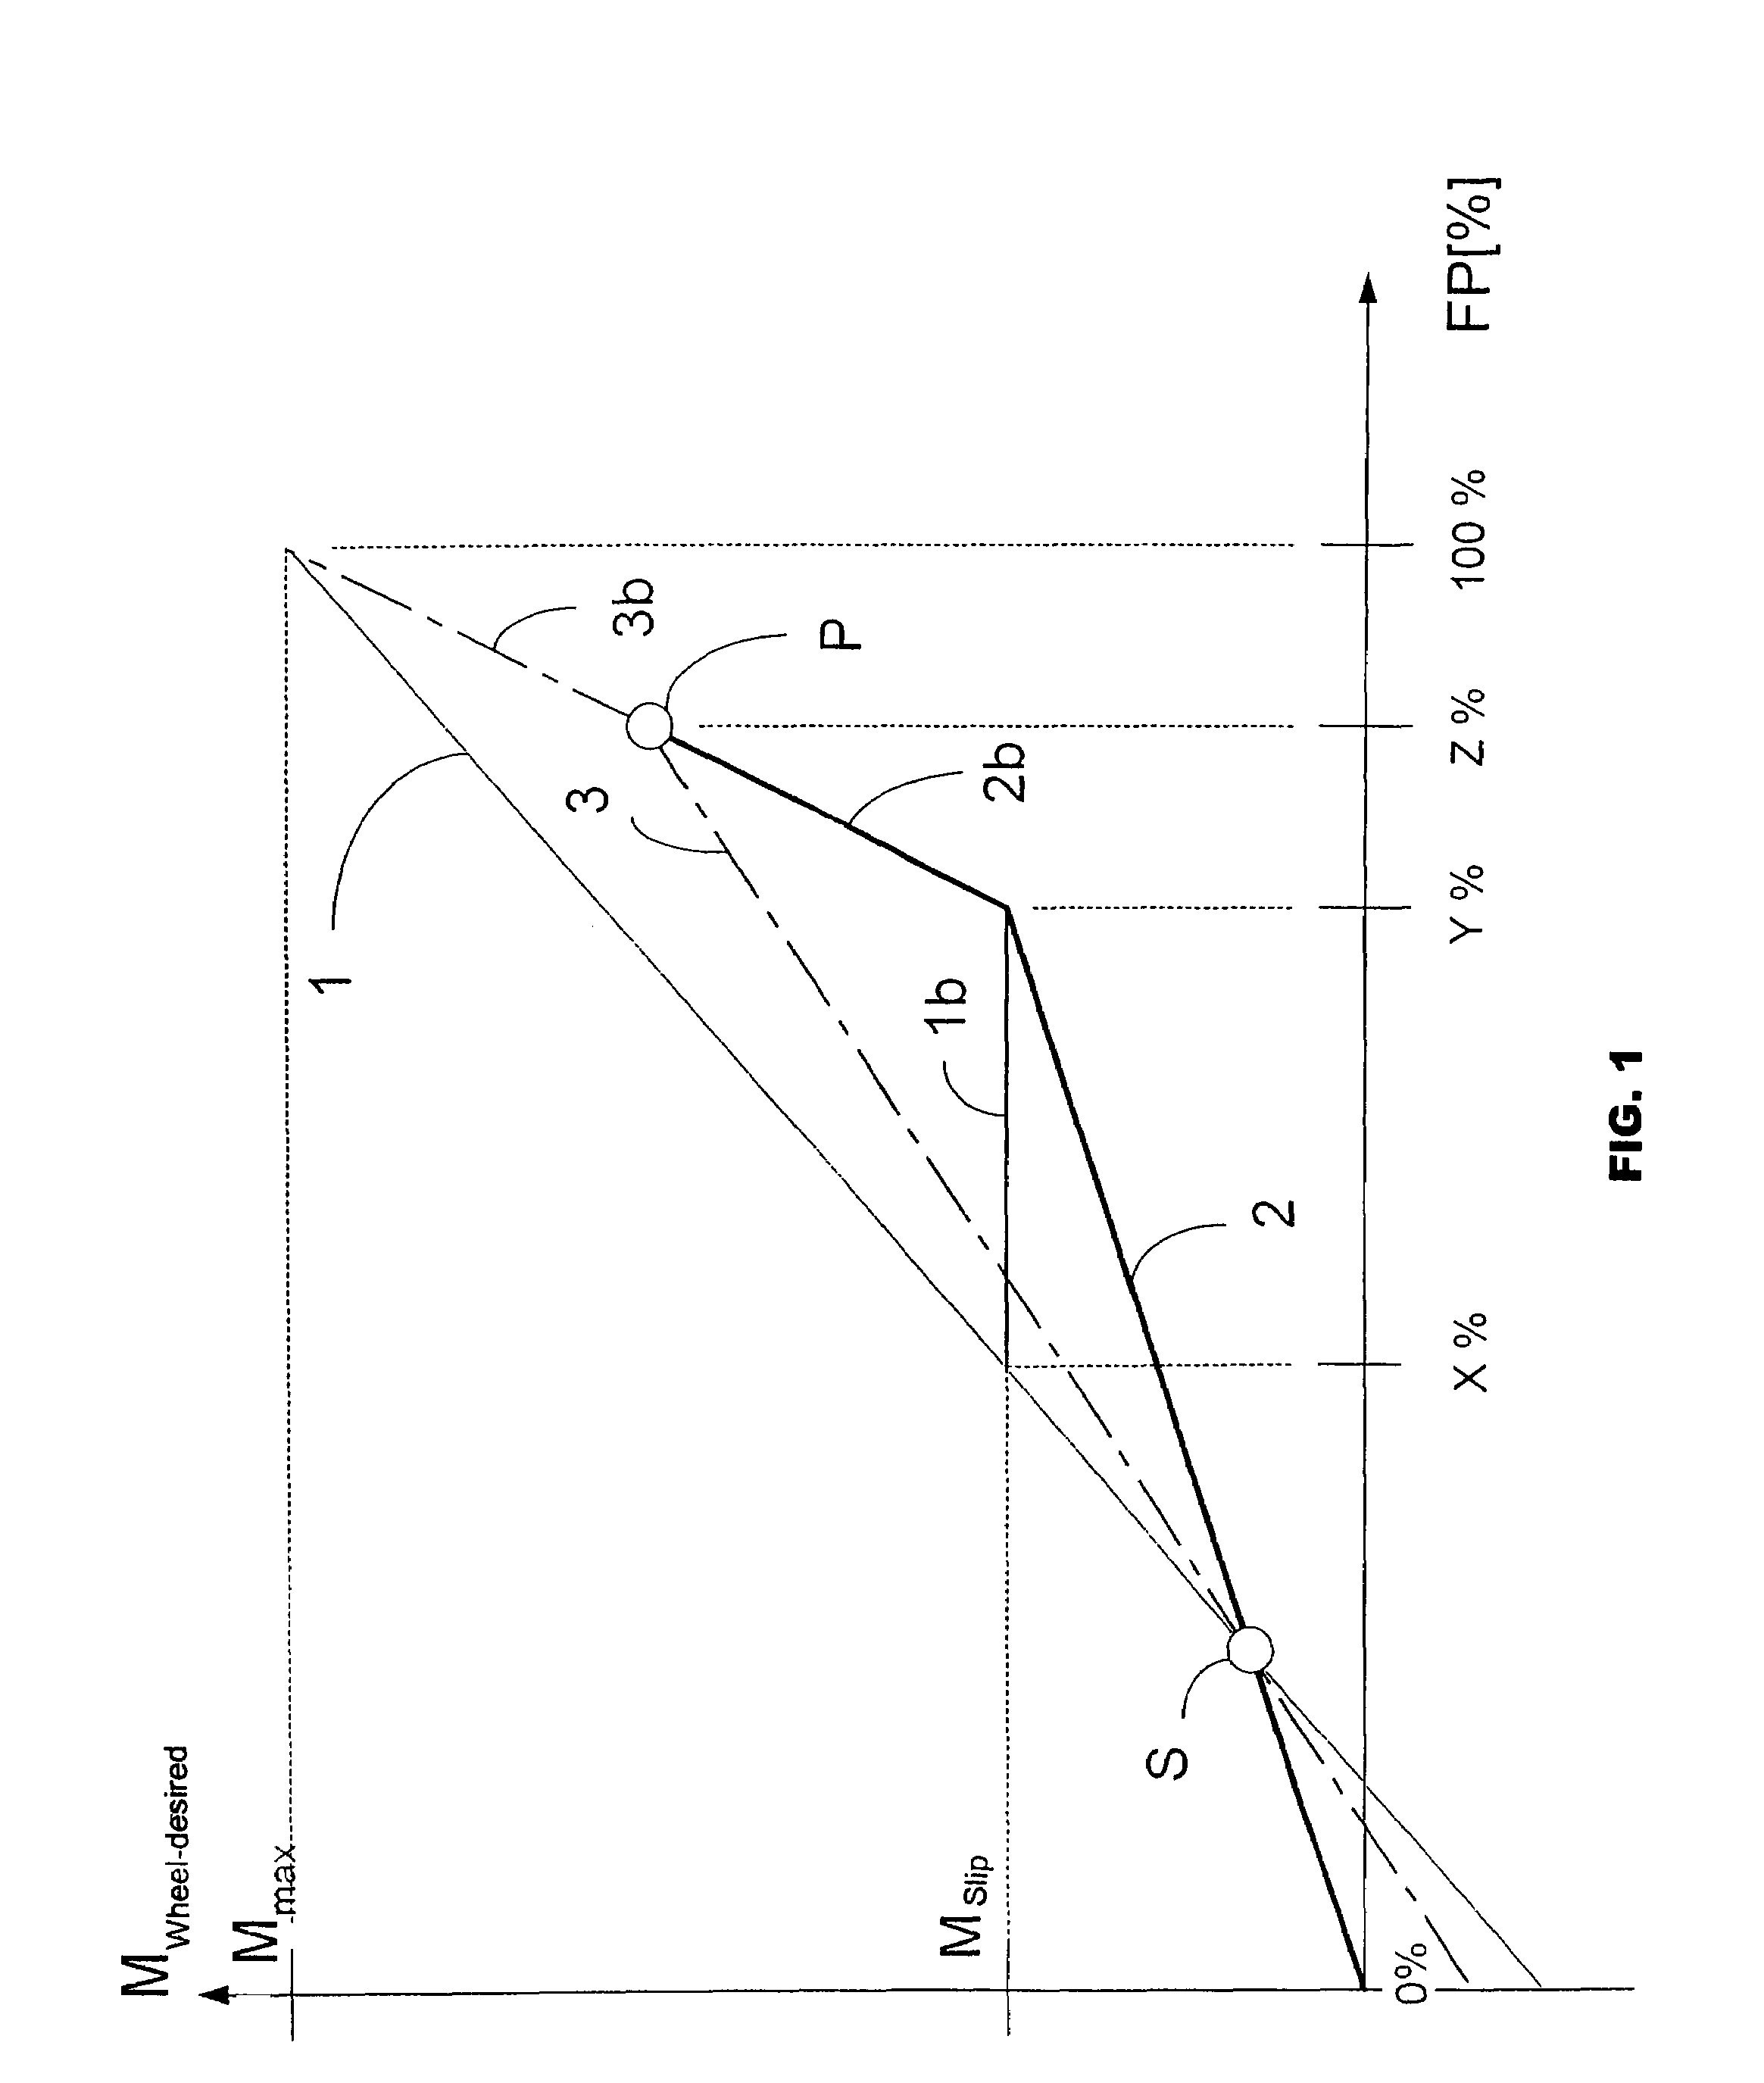 Anti-slip control method for a drive system in a motor vehicle